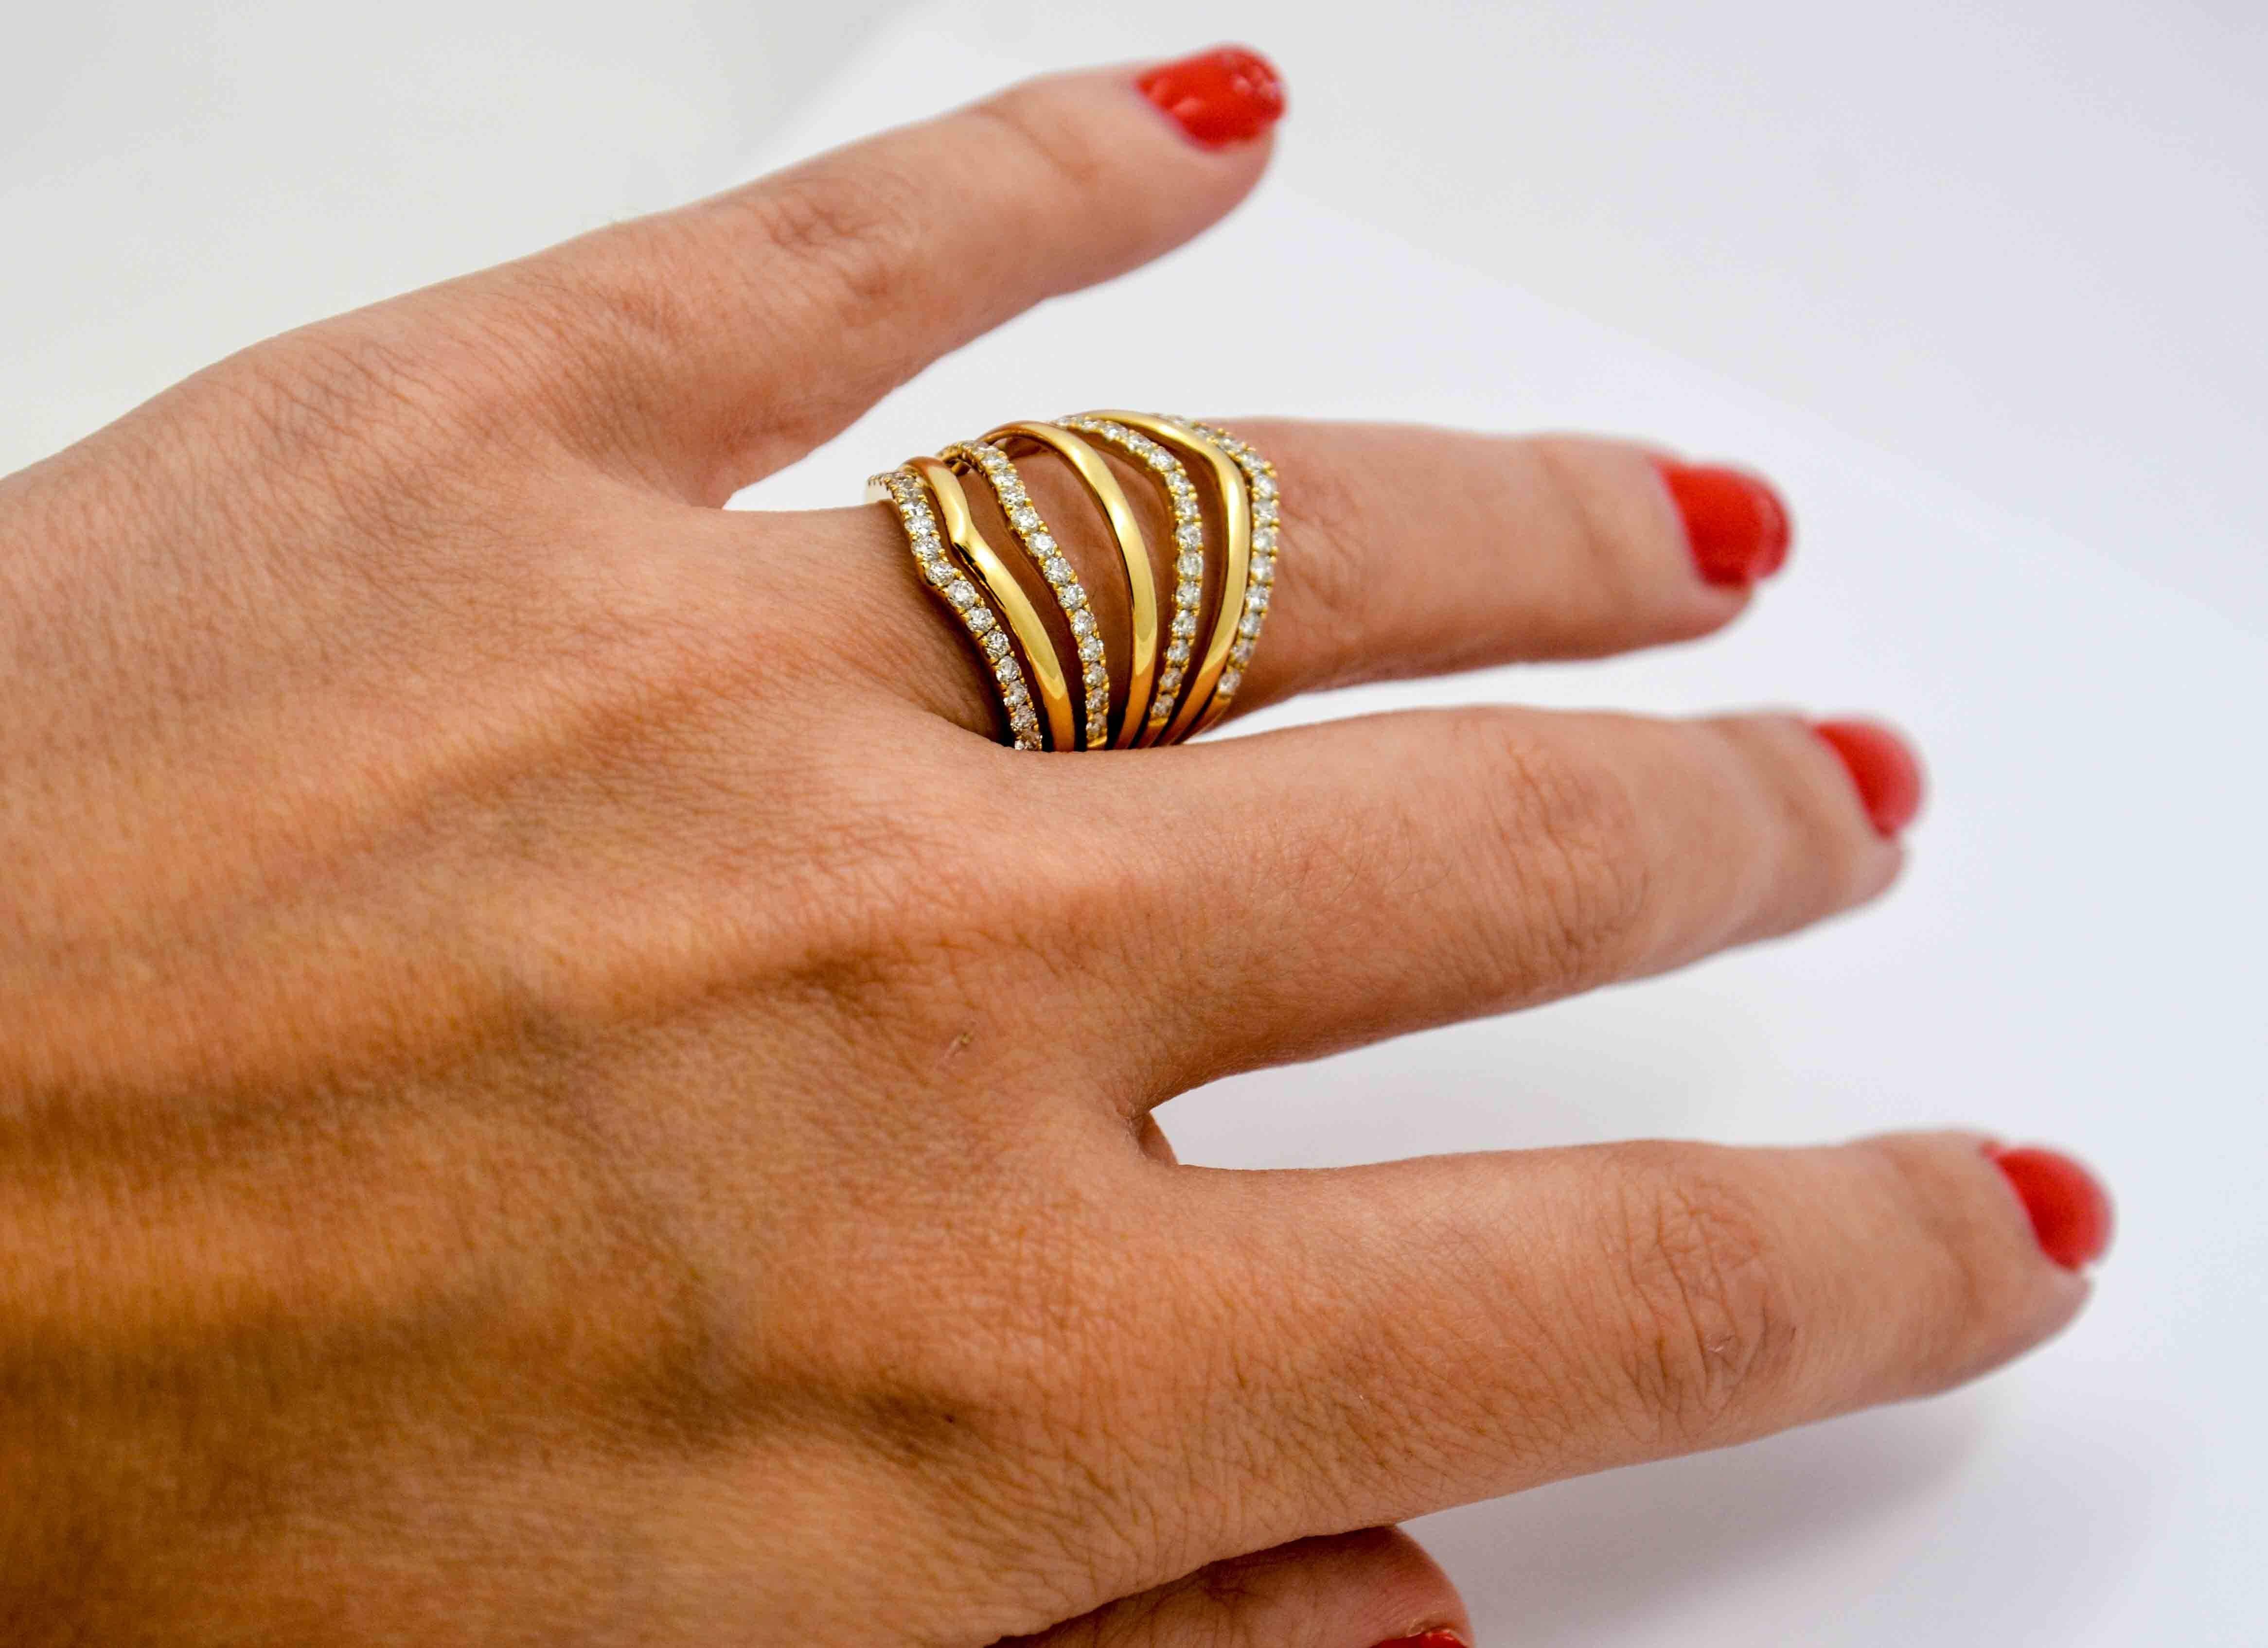 Fanning out like an accordion, this uncommonly impressive 18kt yellow gold and diamond ring is designed in a remarkable seven band split shank design.  The high polish of 18 kt gold contrasts nicely as every other row is set with round brilliant cut